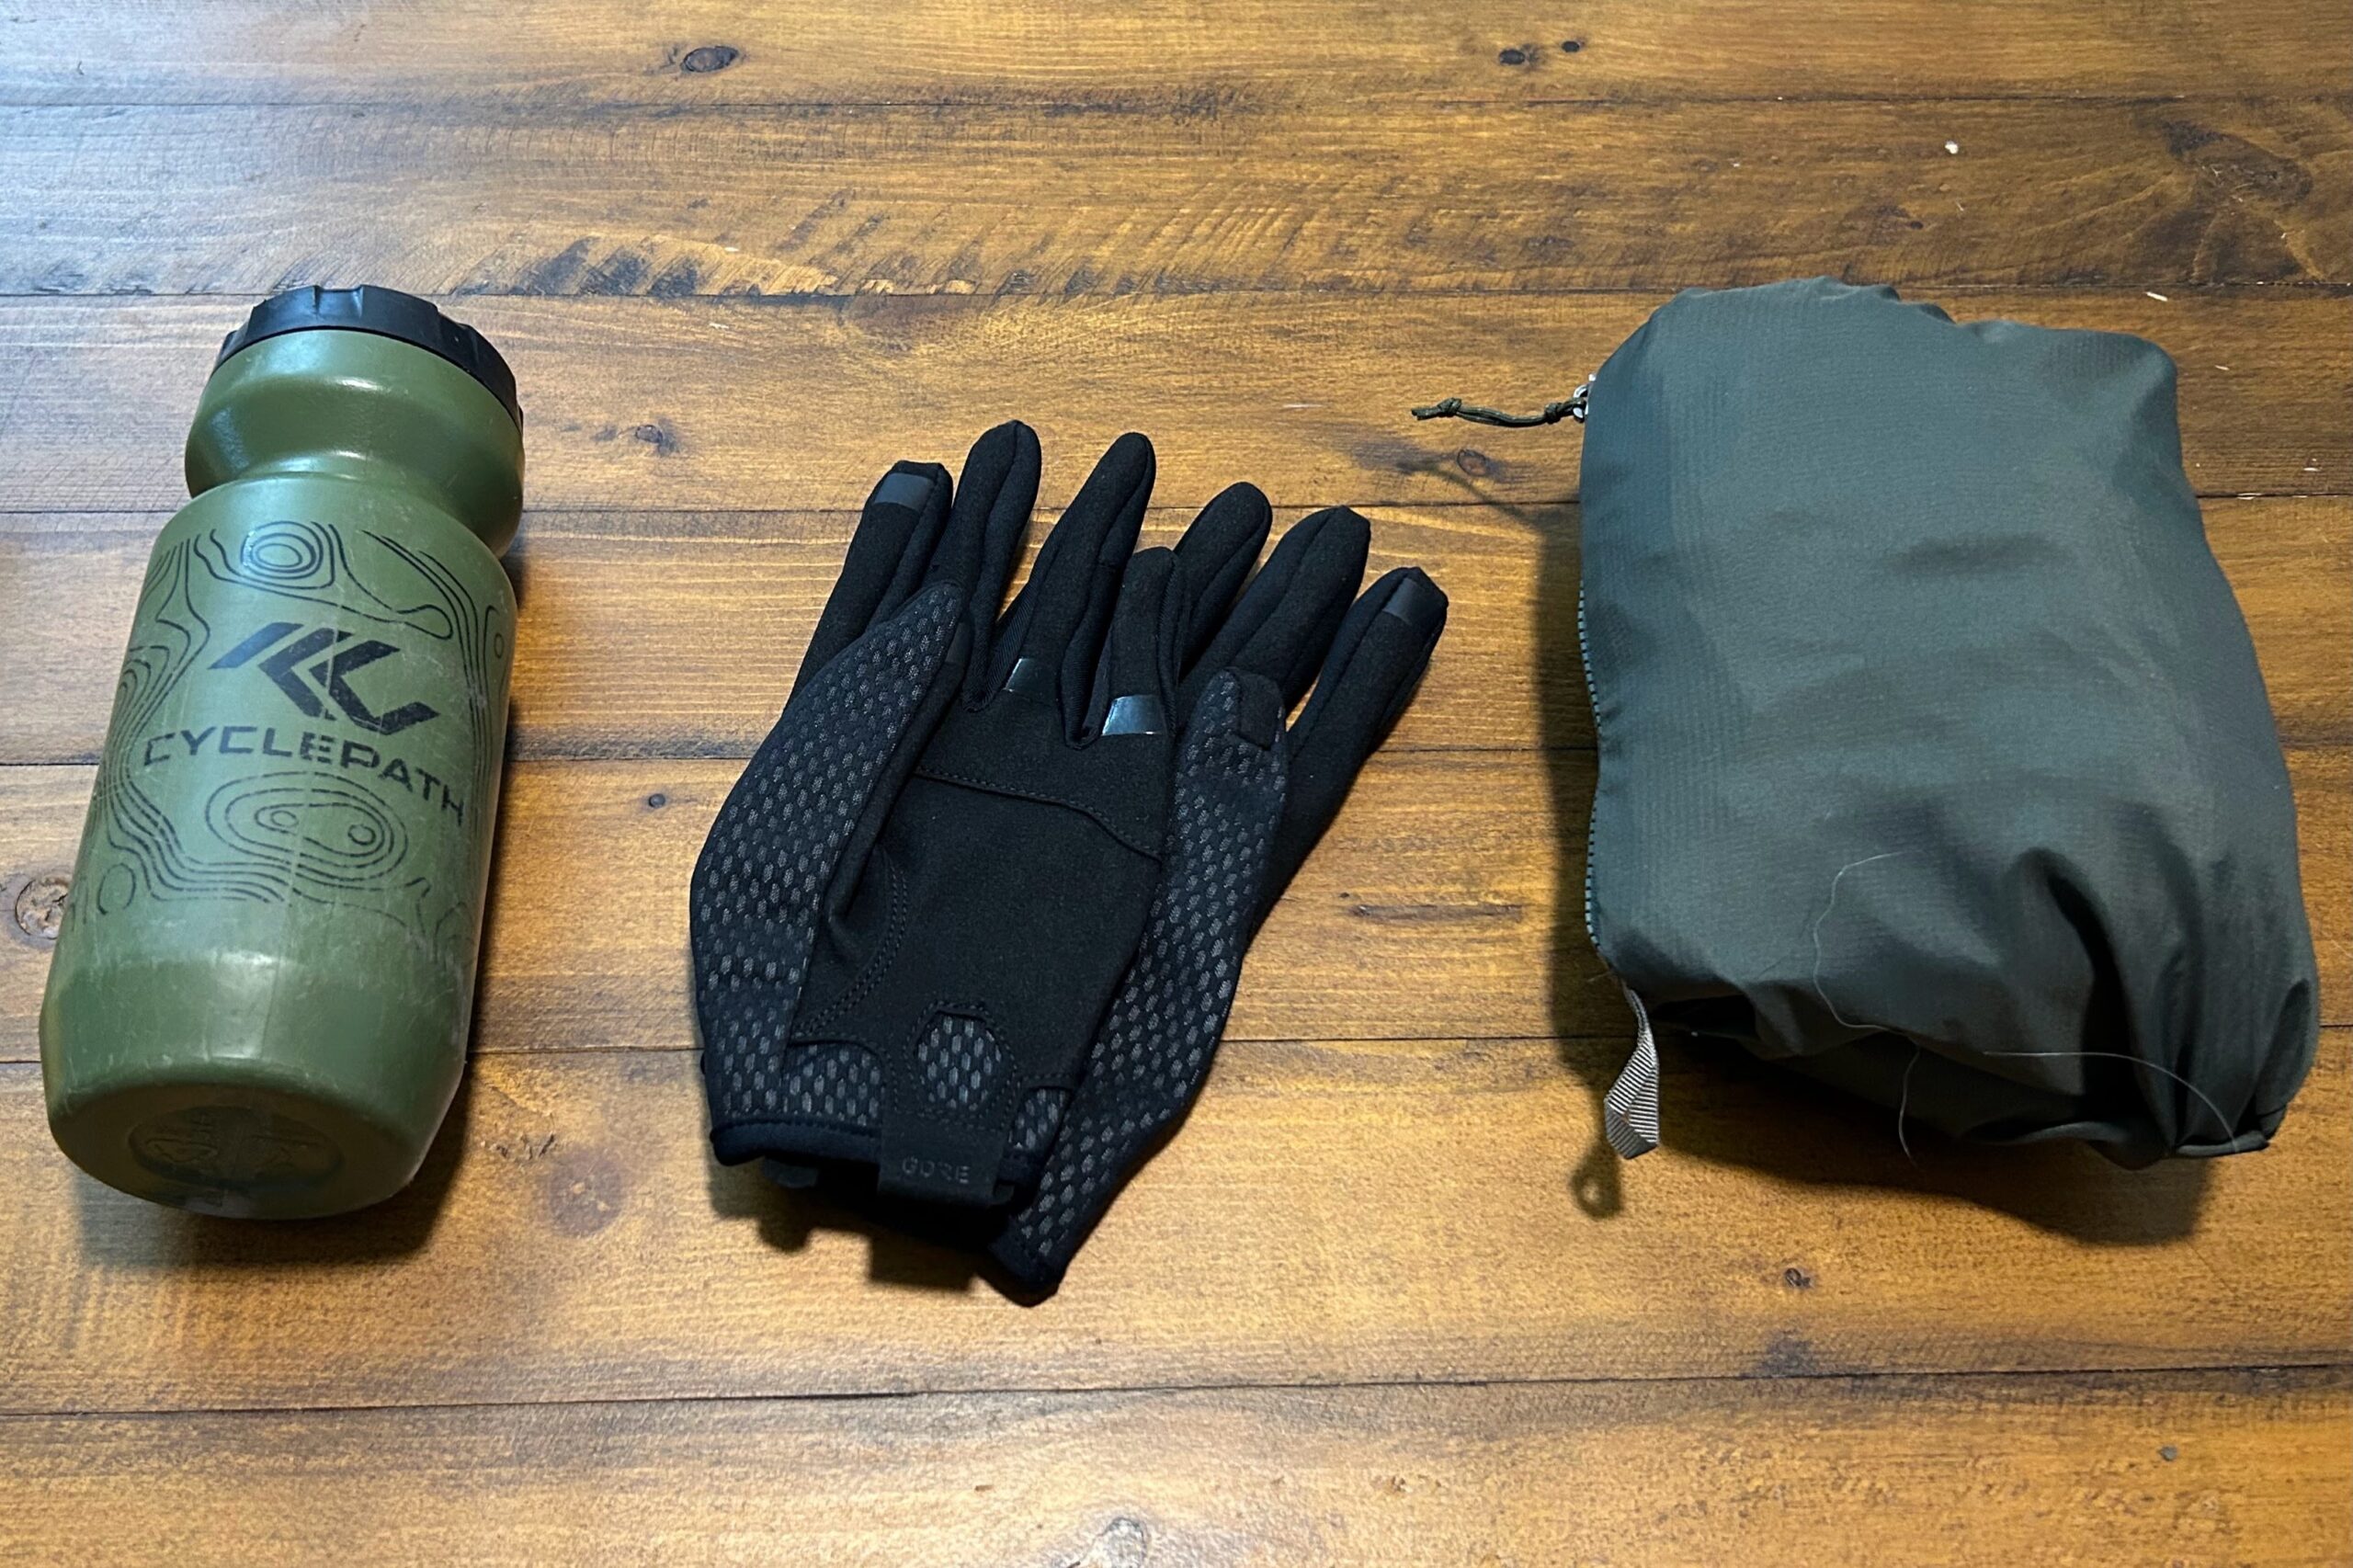 The Patagonia Dirt Roamer mountain bike jacket packed into its pocket and compared to a pair of gloves and water bottle